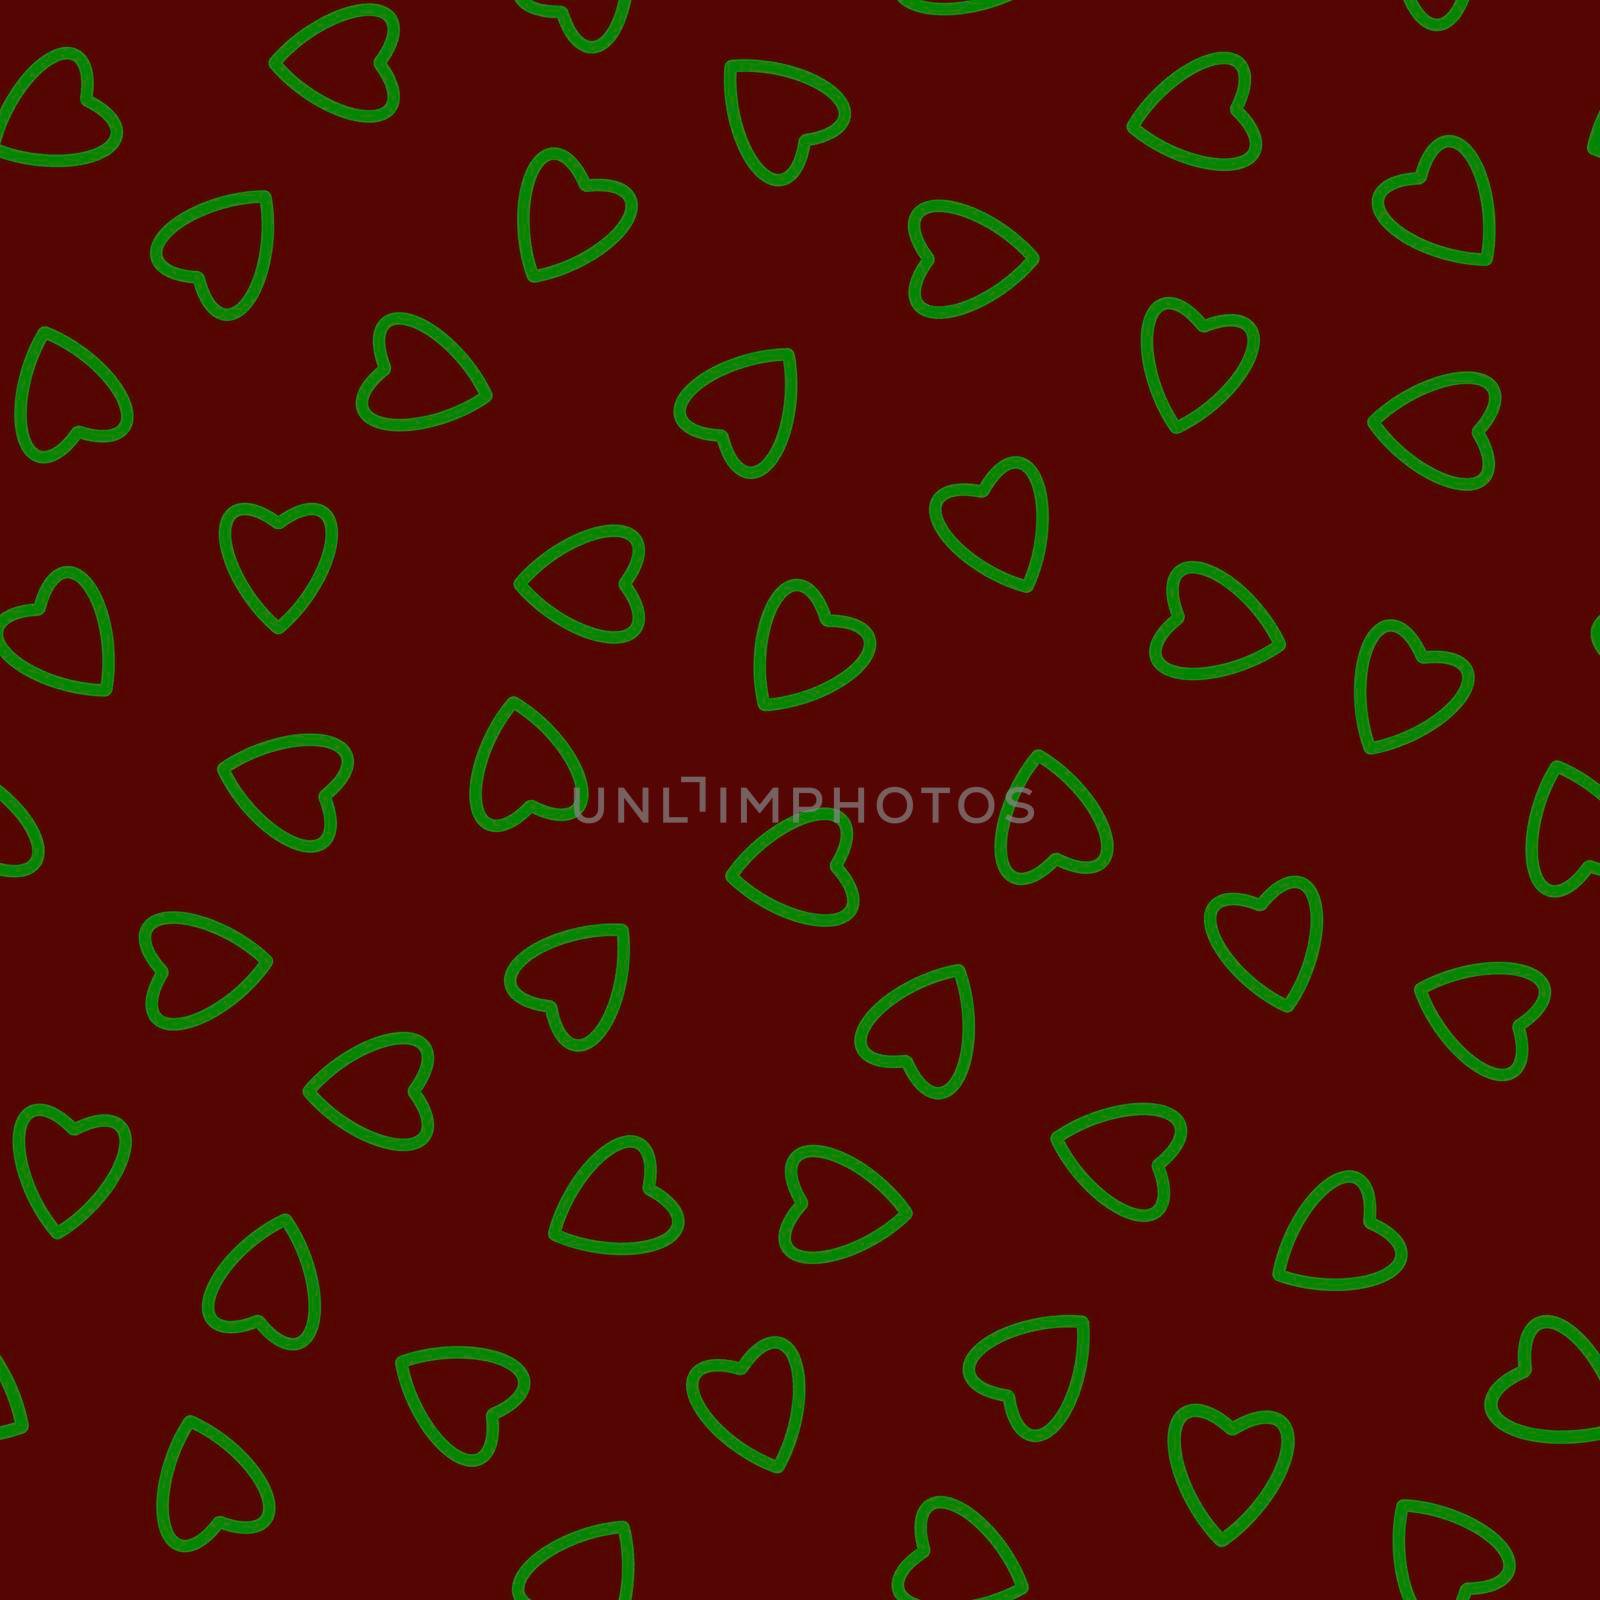 Simple heart seamless pattern,endless chaotic texture made of tiny heart silhouettes.Valentines,mothers day background.Green on burgundy.Great for Easter,wedding,scrapbook,gift wrapping paper,textiles